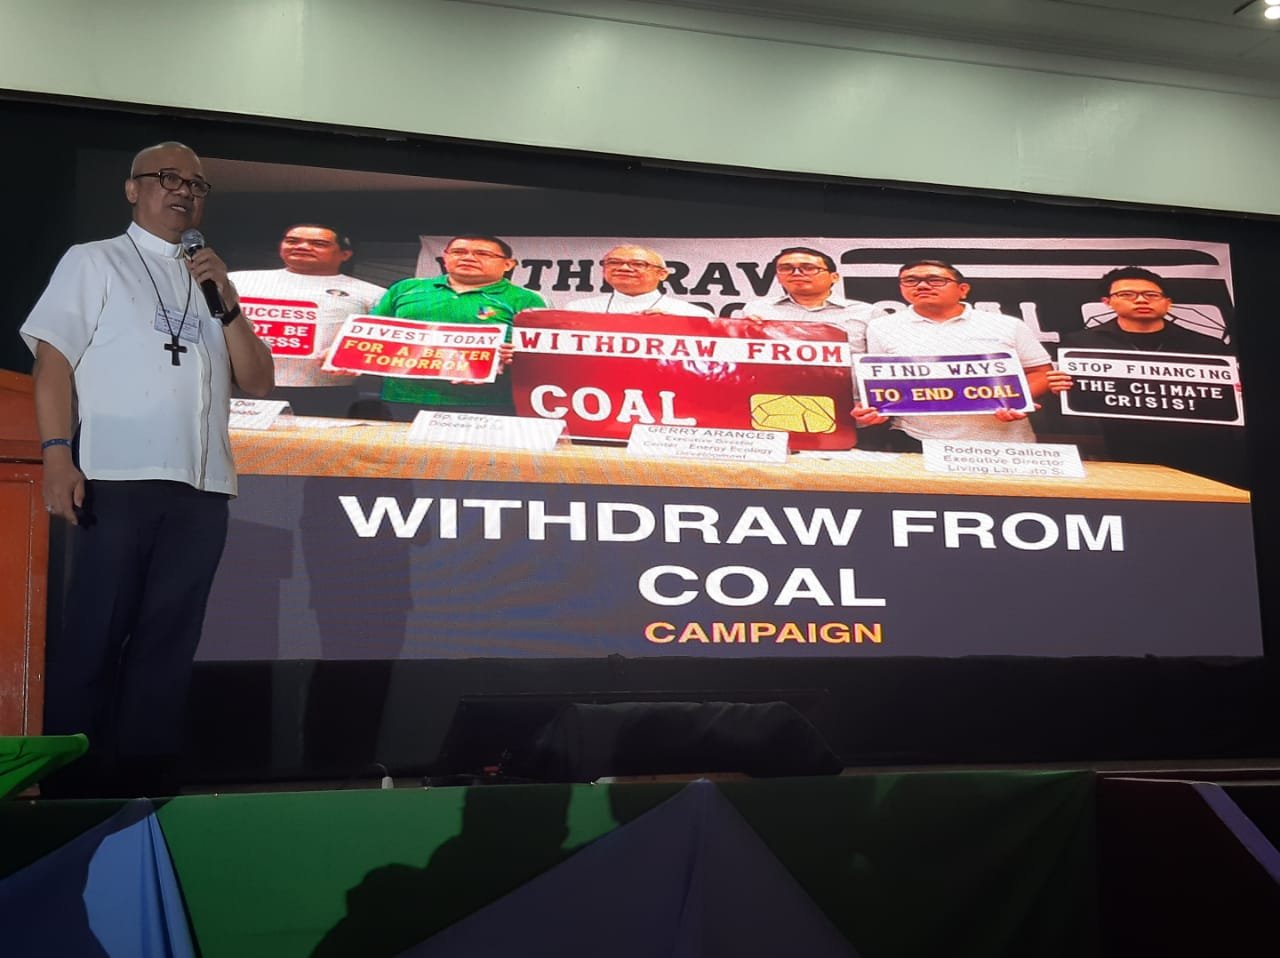 Church leader calls on banks to divest from coal